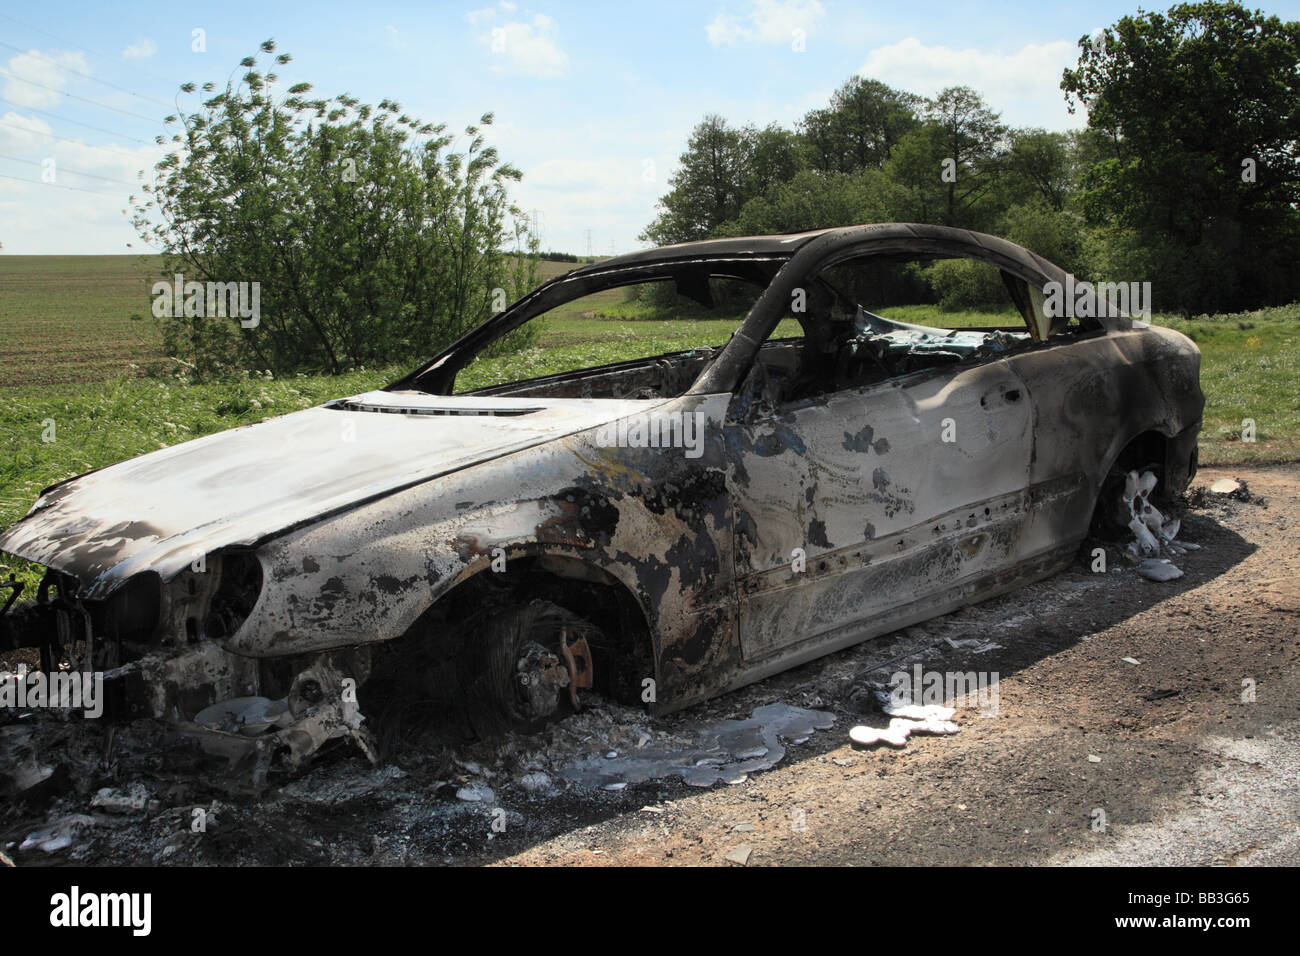 A burnt out shell of a Mercedes Benz Coupe left in rural farmland Stock Photo